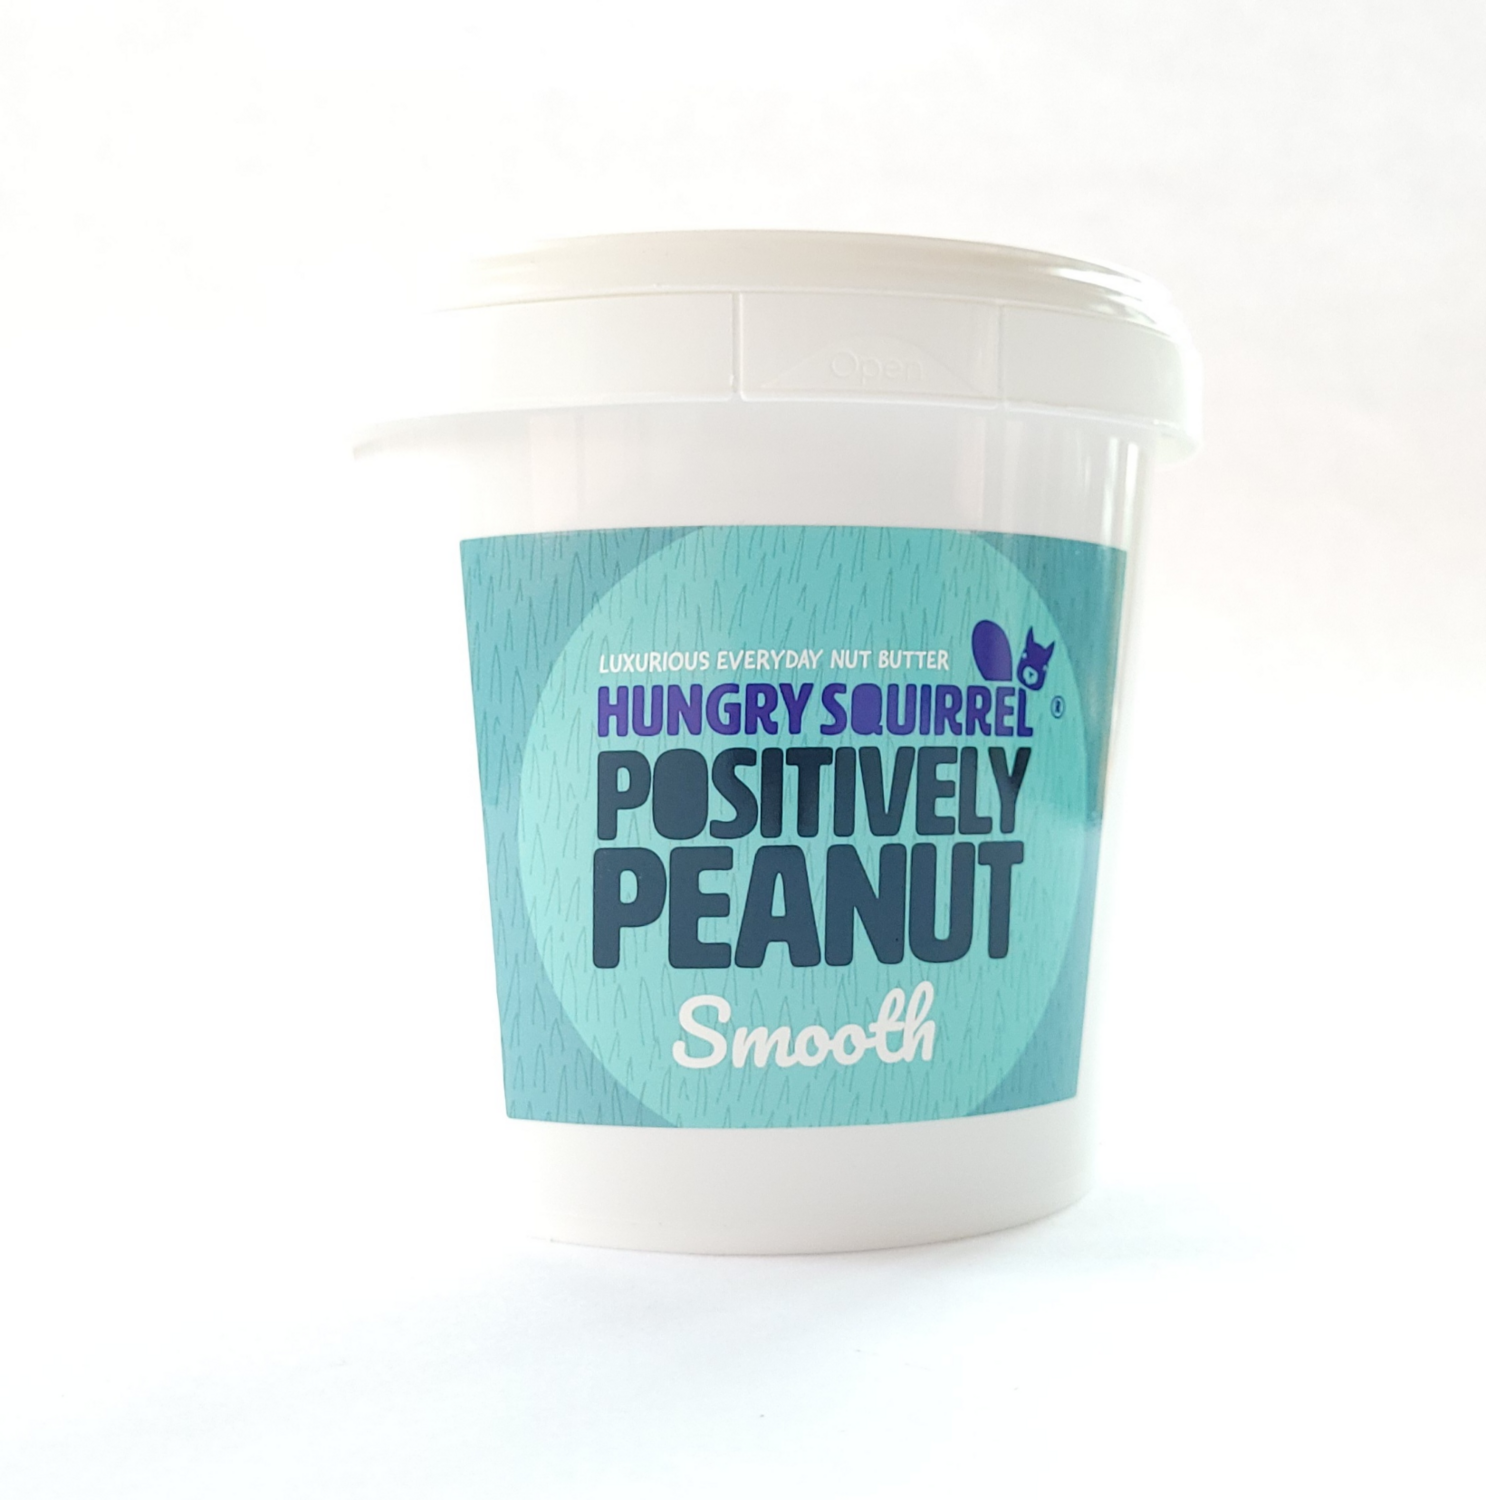 Positively Peanut Smooth peanut butter 1kg